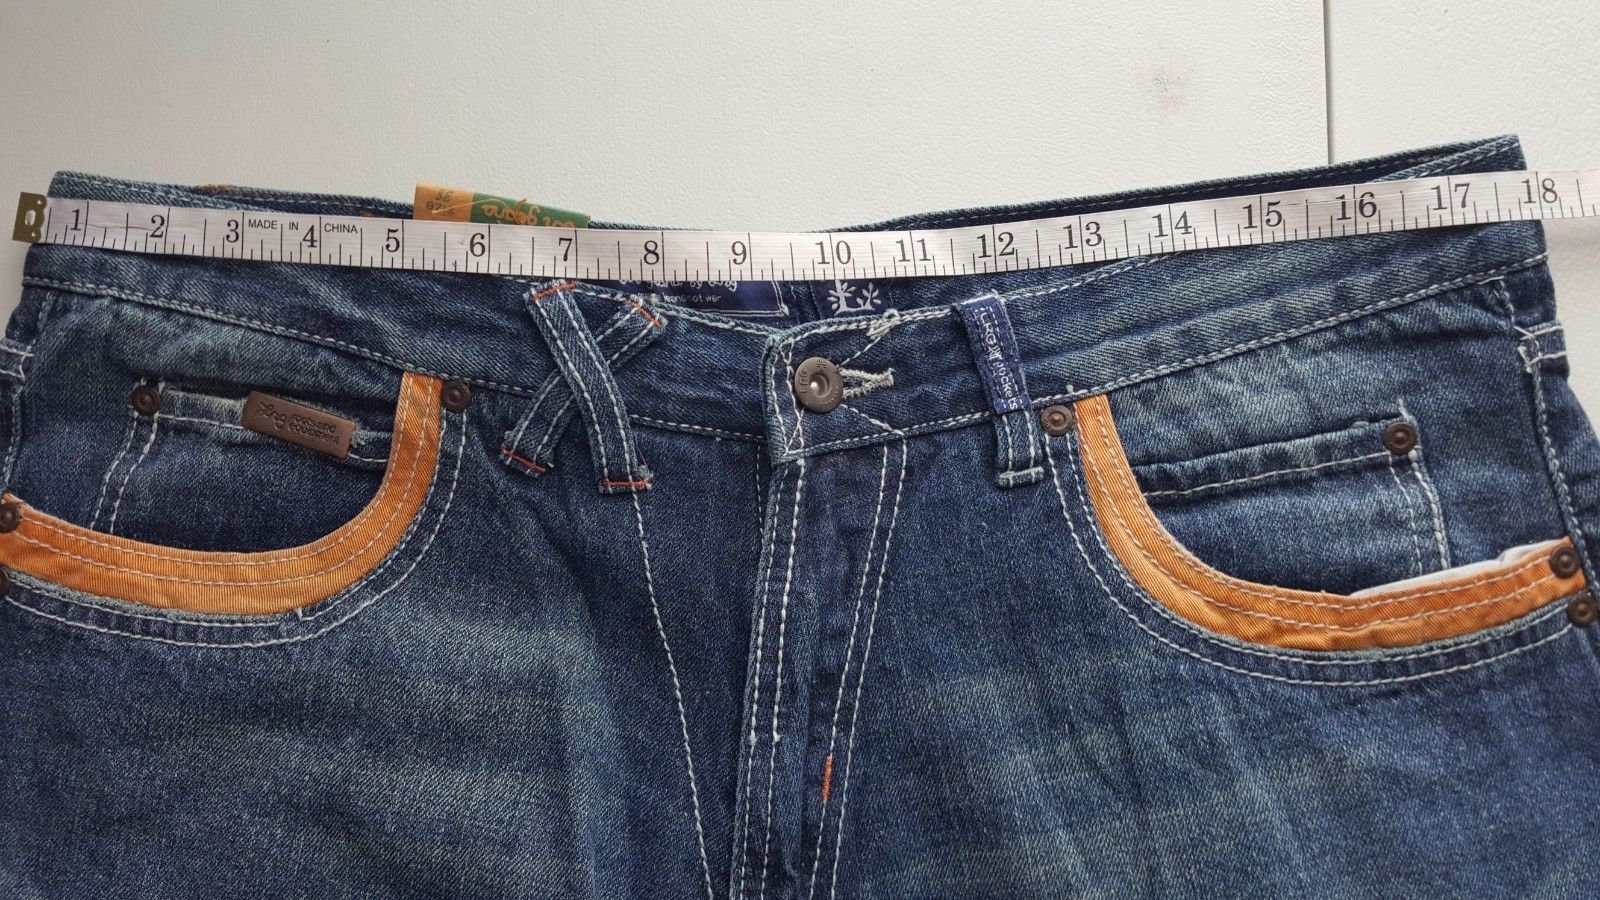 Ln Geans by Lng Jeans Mens Tag Size 38 true size 36x32 Make Jean Not ...